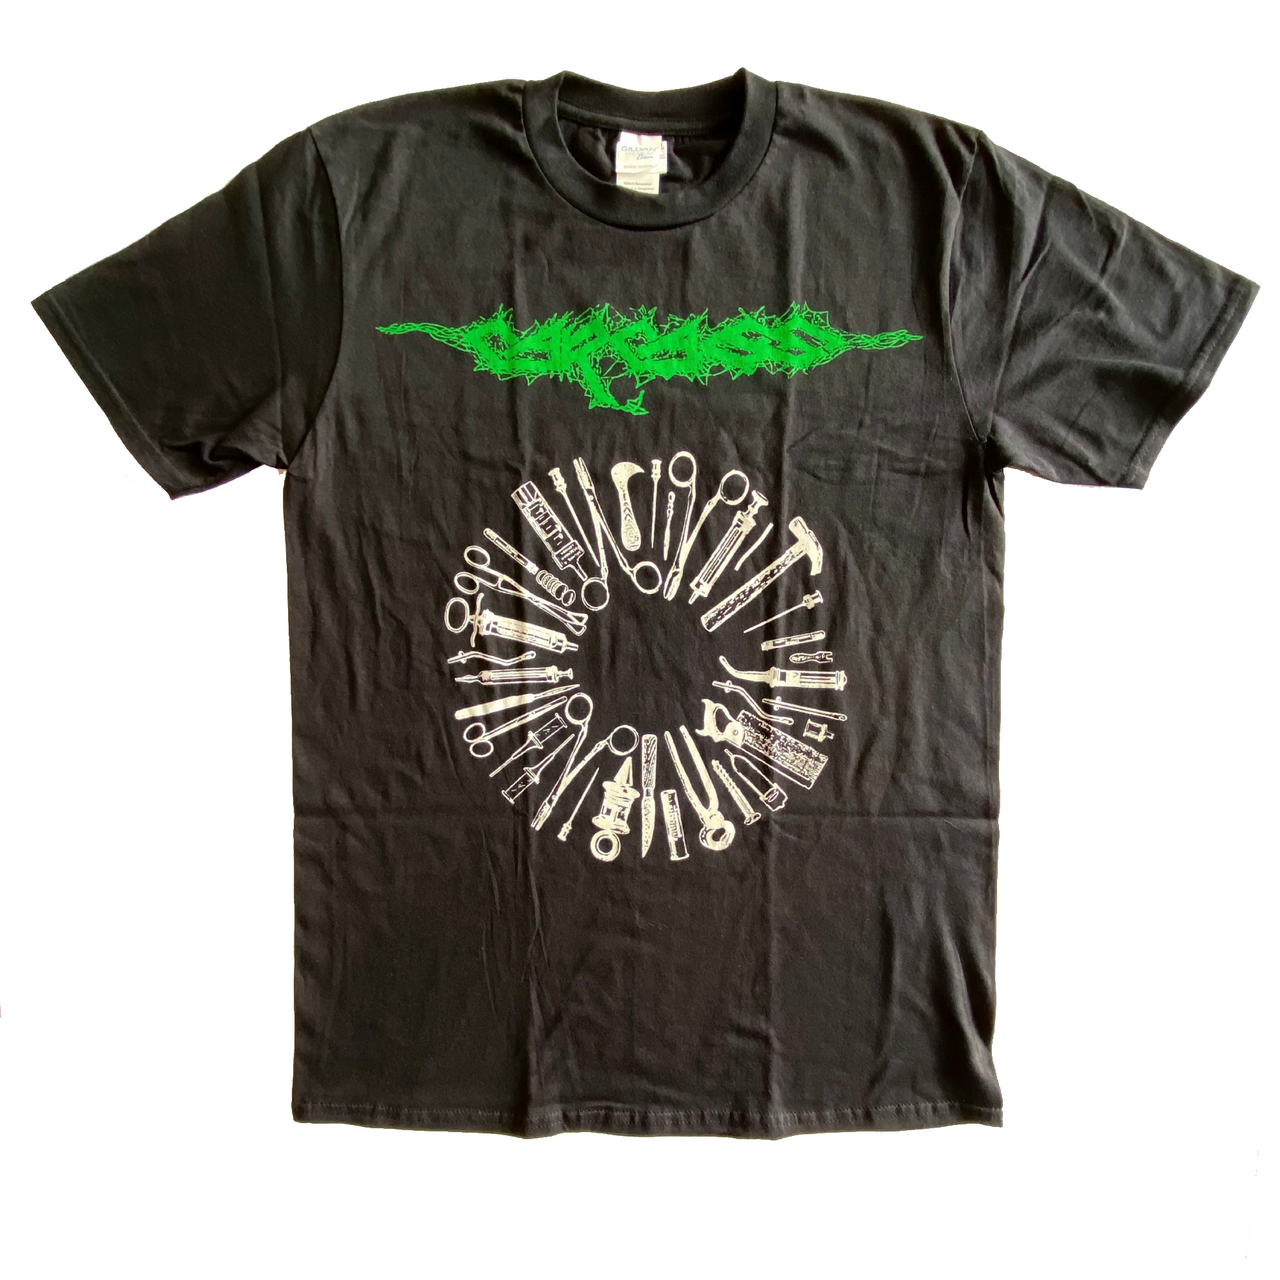 Carcass Tools of the Trade T-Shirt